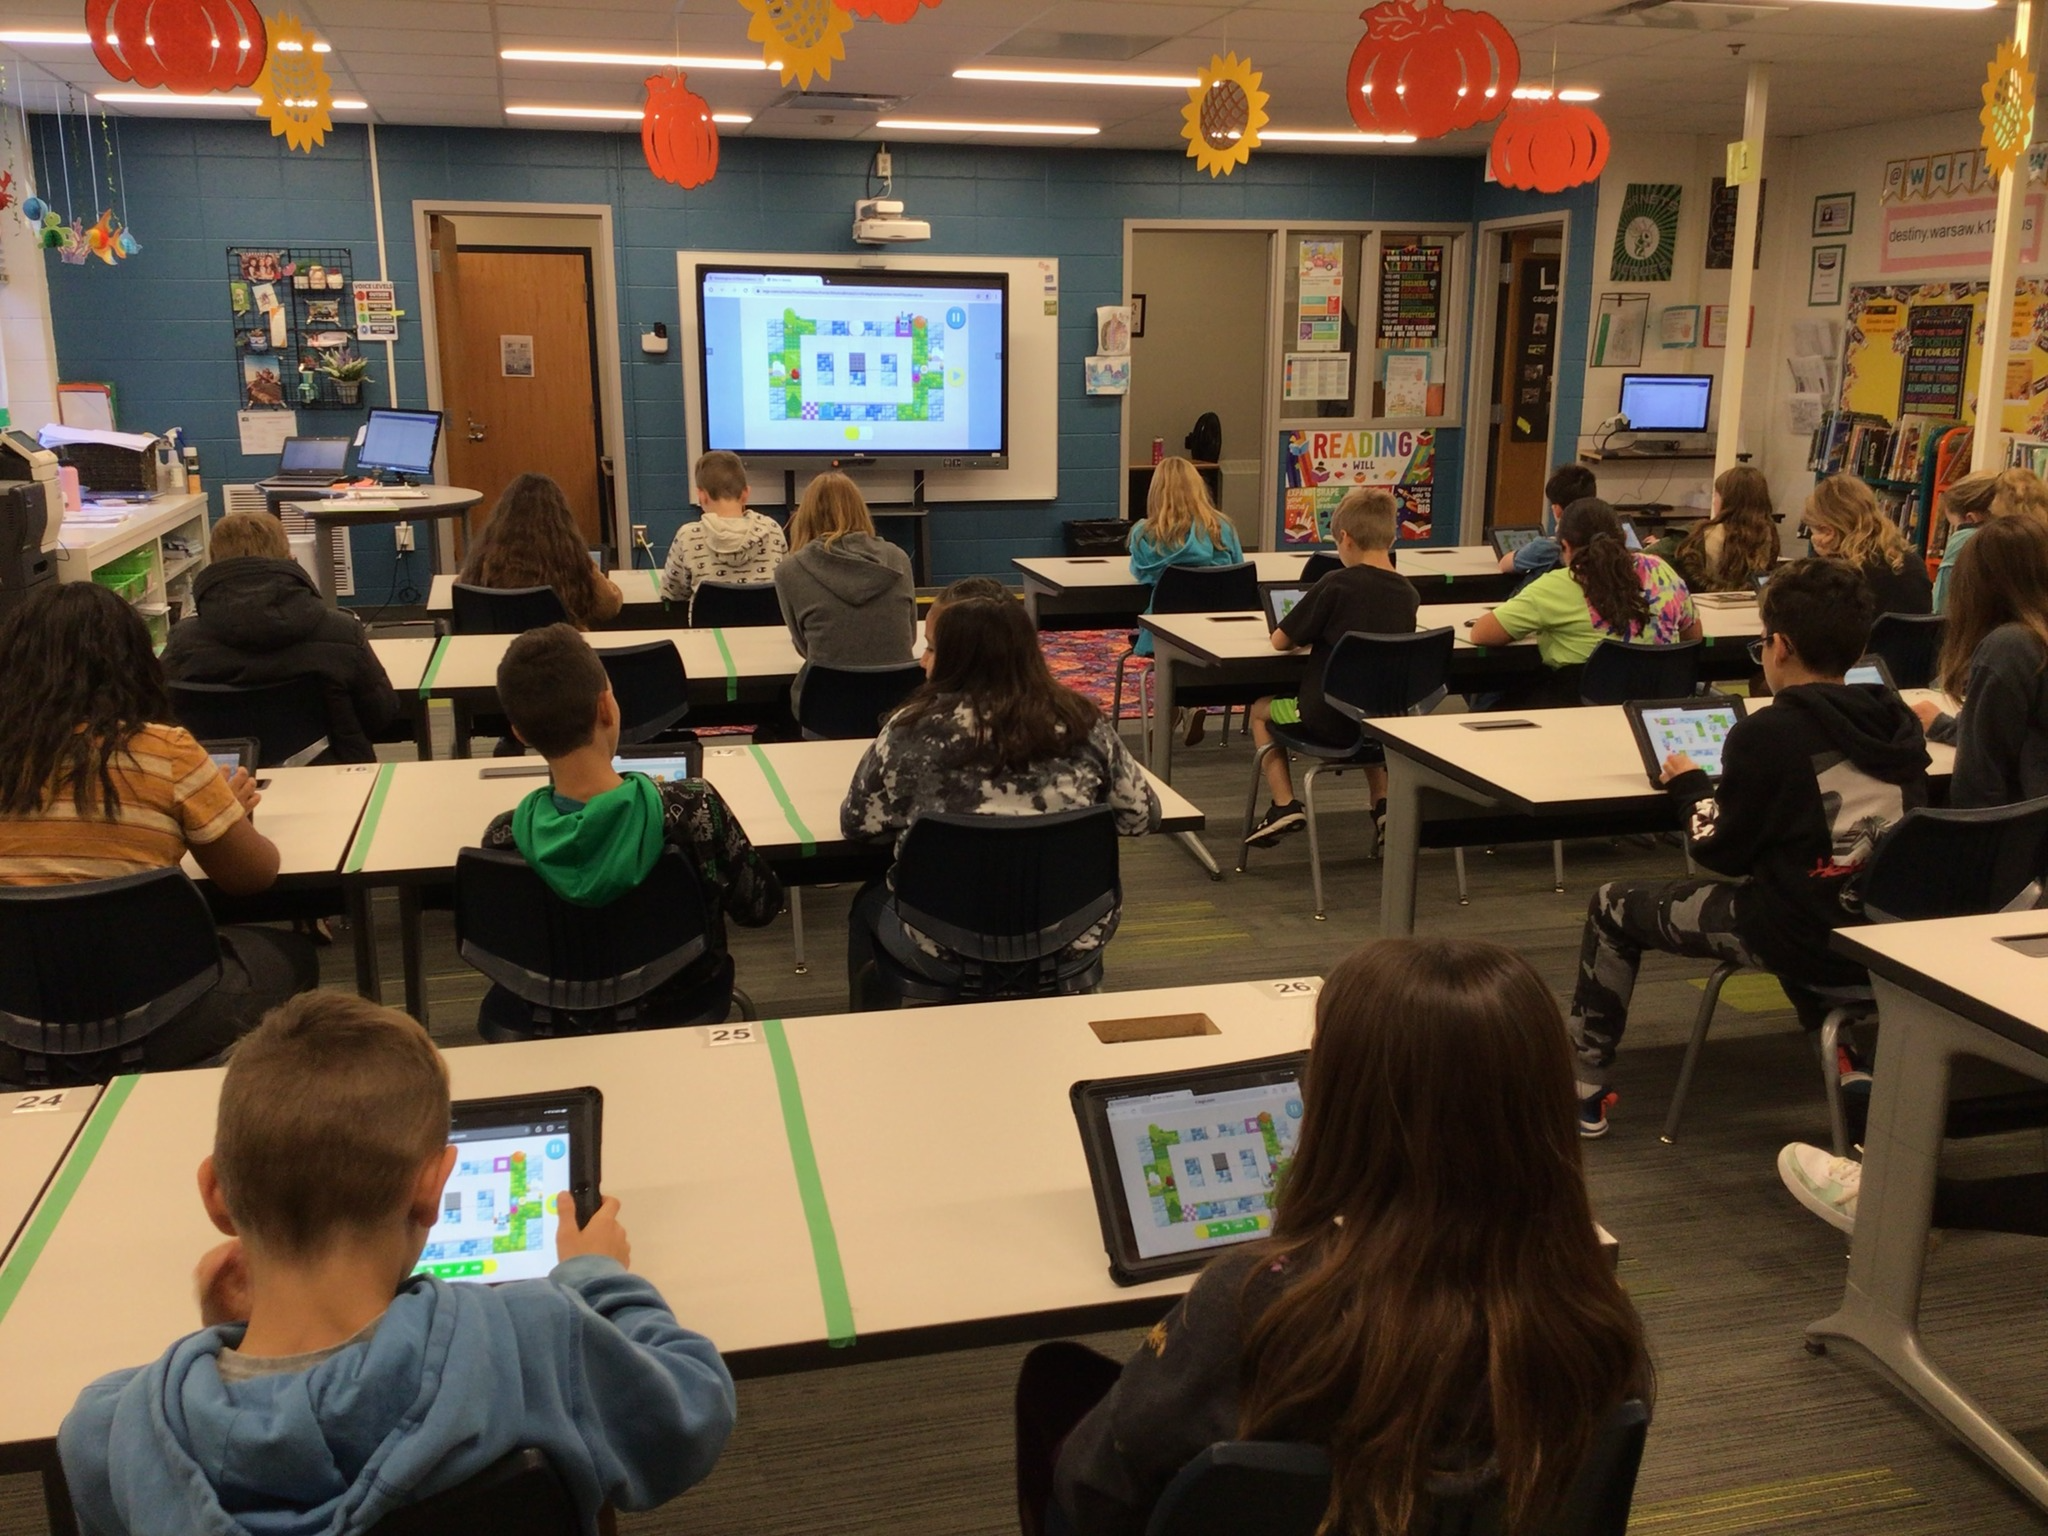 Students in a classroom on iPads all playing the same game that is projected on the screen at the front of the room